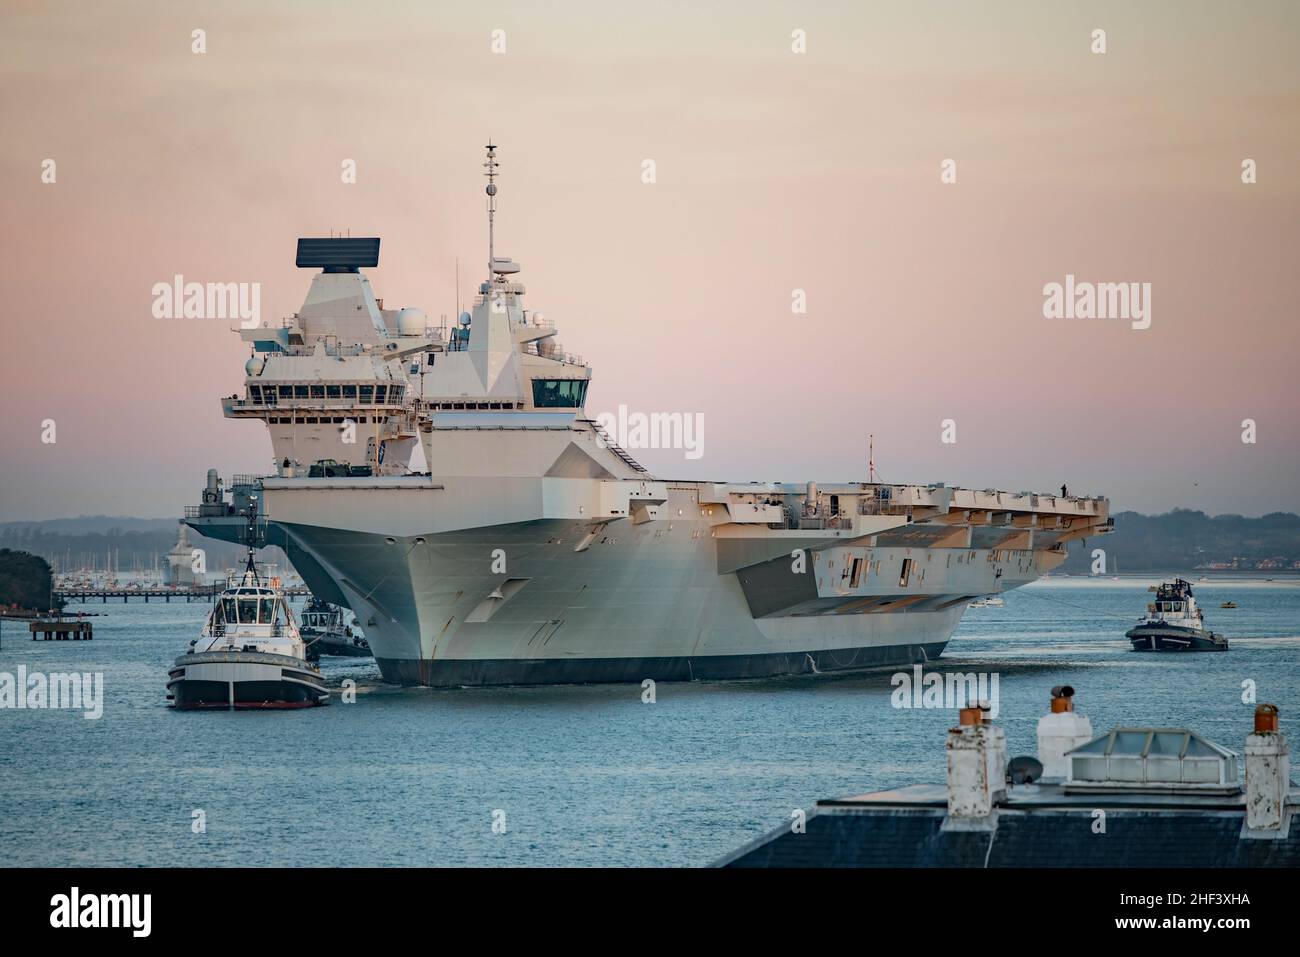 Royal Navy warship HMS Prince of Wales (R09) left Portsmouth Harbour, UK at sunrise on 12/1/22 to take over as flagship of the NATO Response Force. Stock Photo